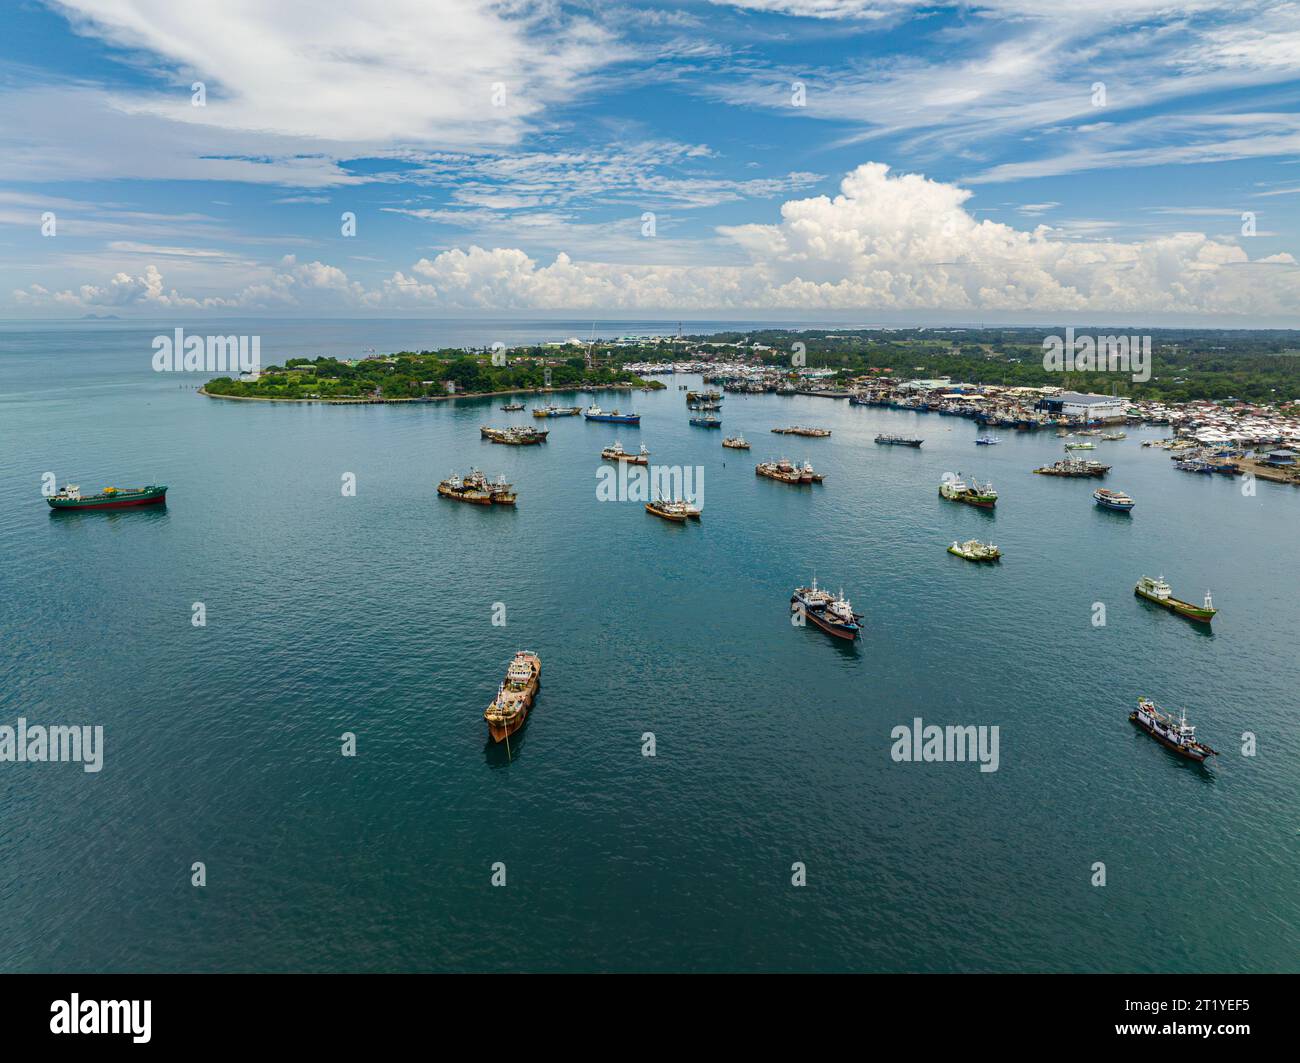 Cargo ships and fishing boats floating in seaport in Maasin, Zamboanga del Sur. Mindanao, Philippines. Stock Photo